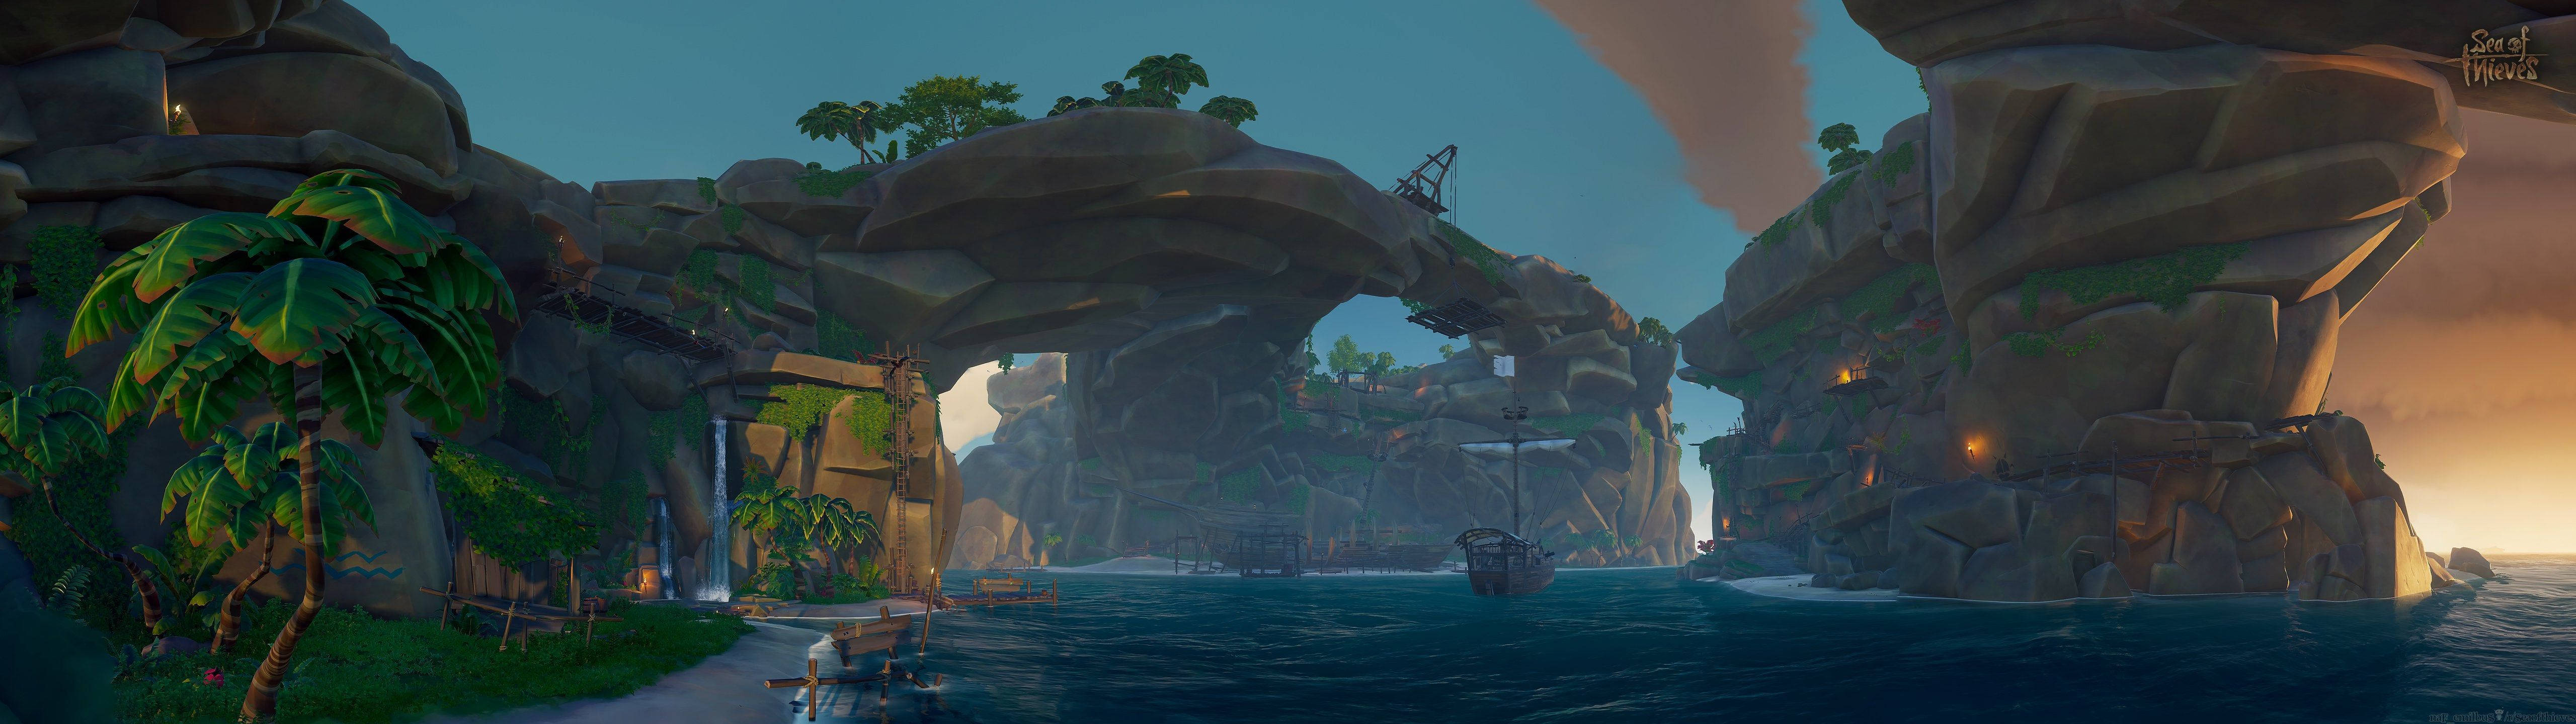 5120x1440 Game Sea Of Thieves Rock Formations Wallpaper